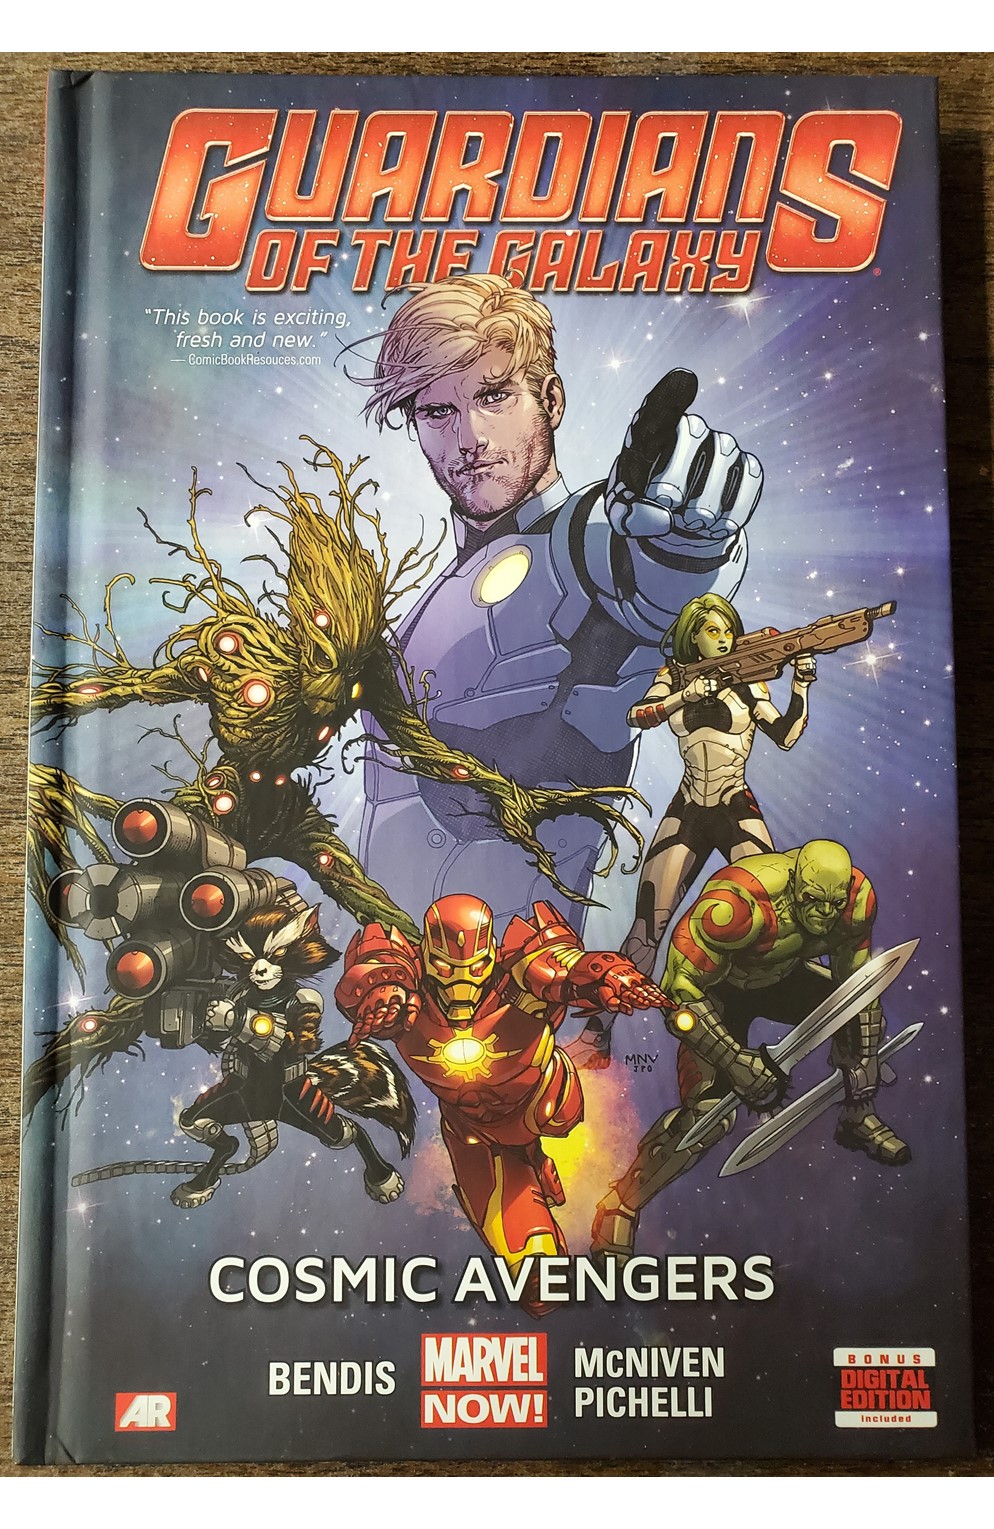 Guardians of the Galaxy Volume One Cosmic Avengers Hardcover (Marvel 2013) Used - Like New